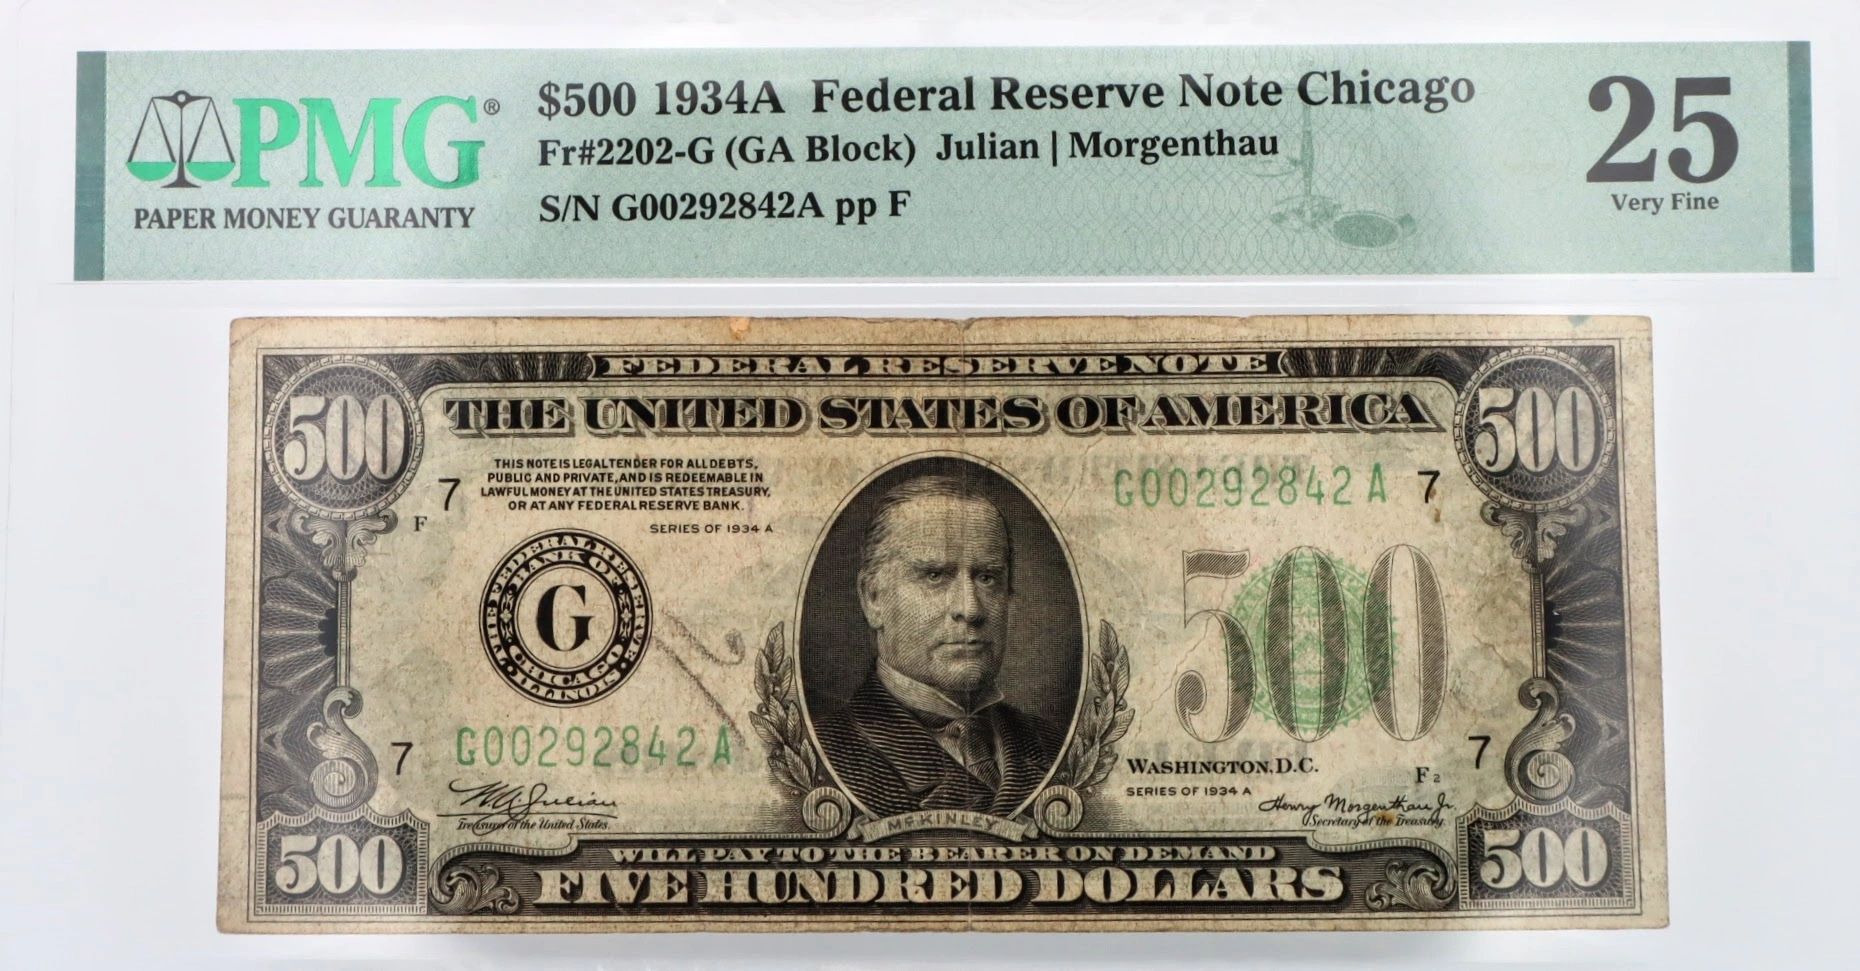 $500 Federal Reserve Note